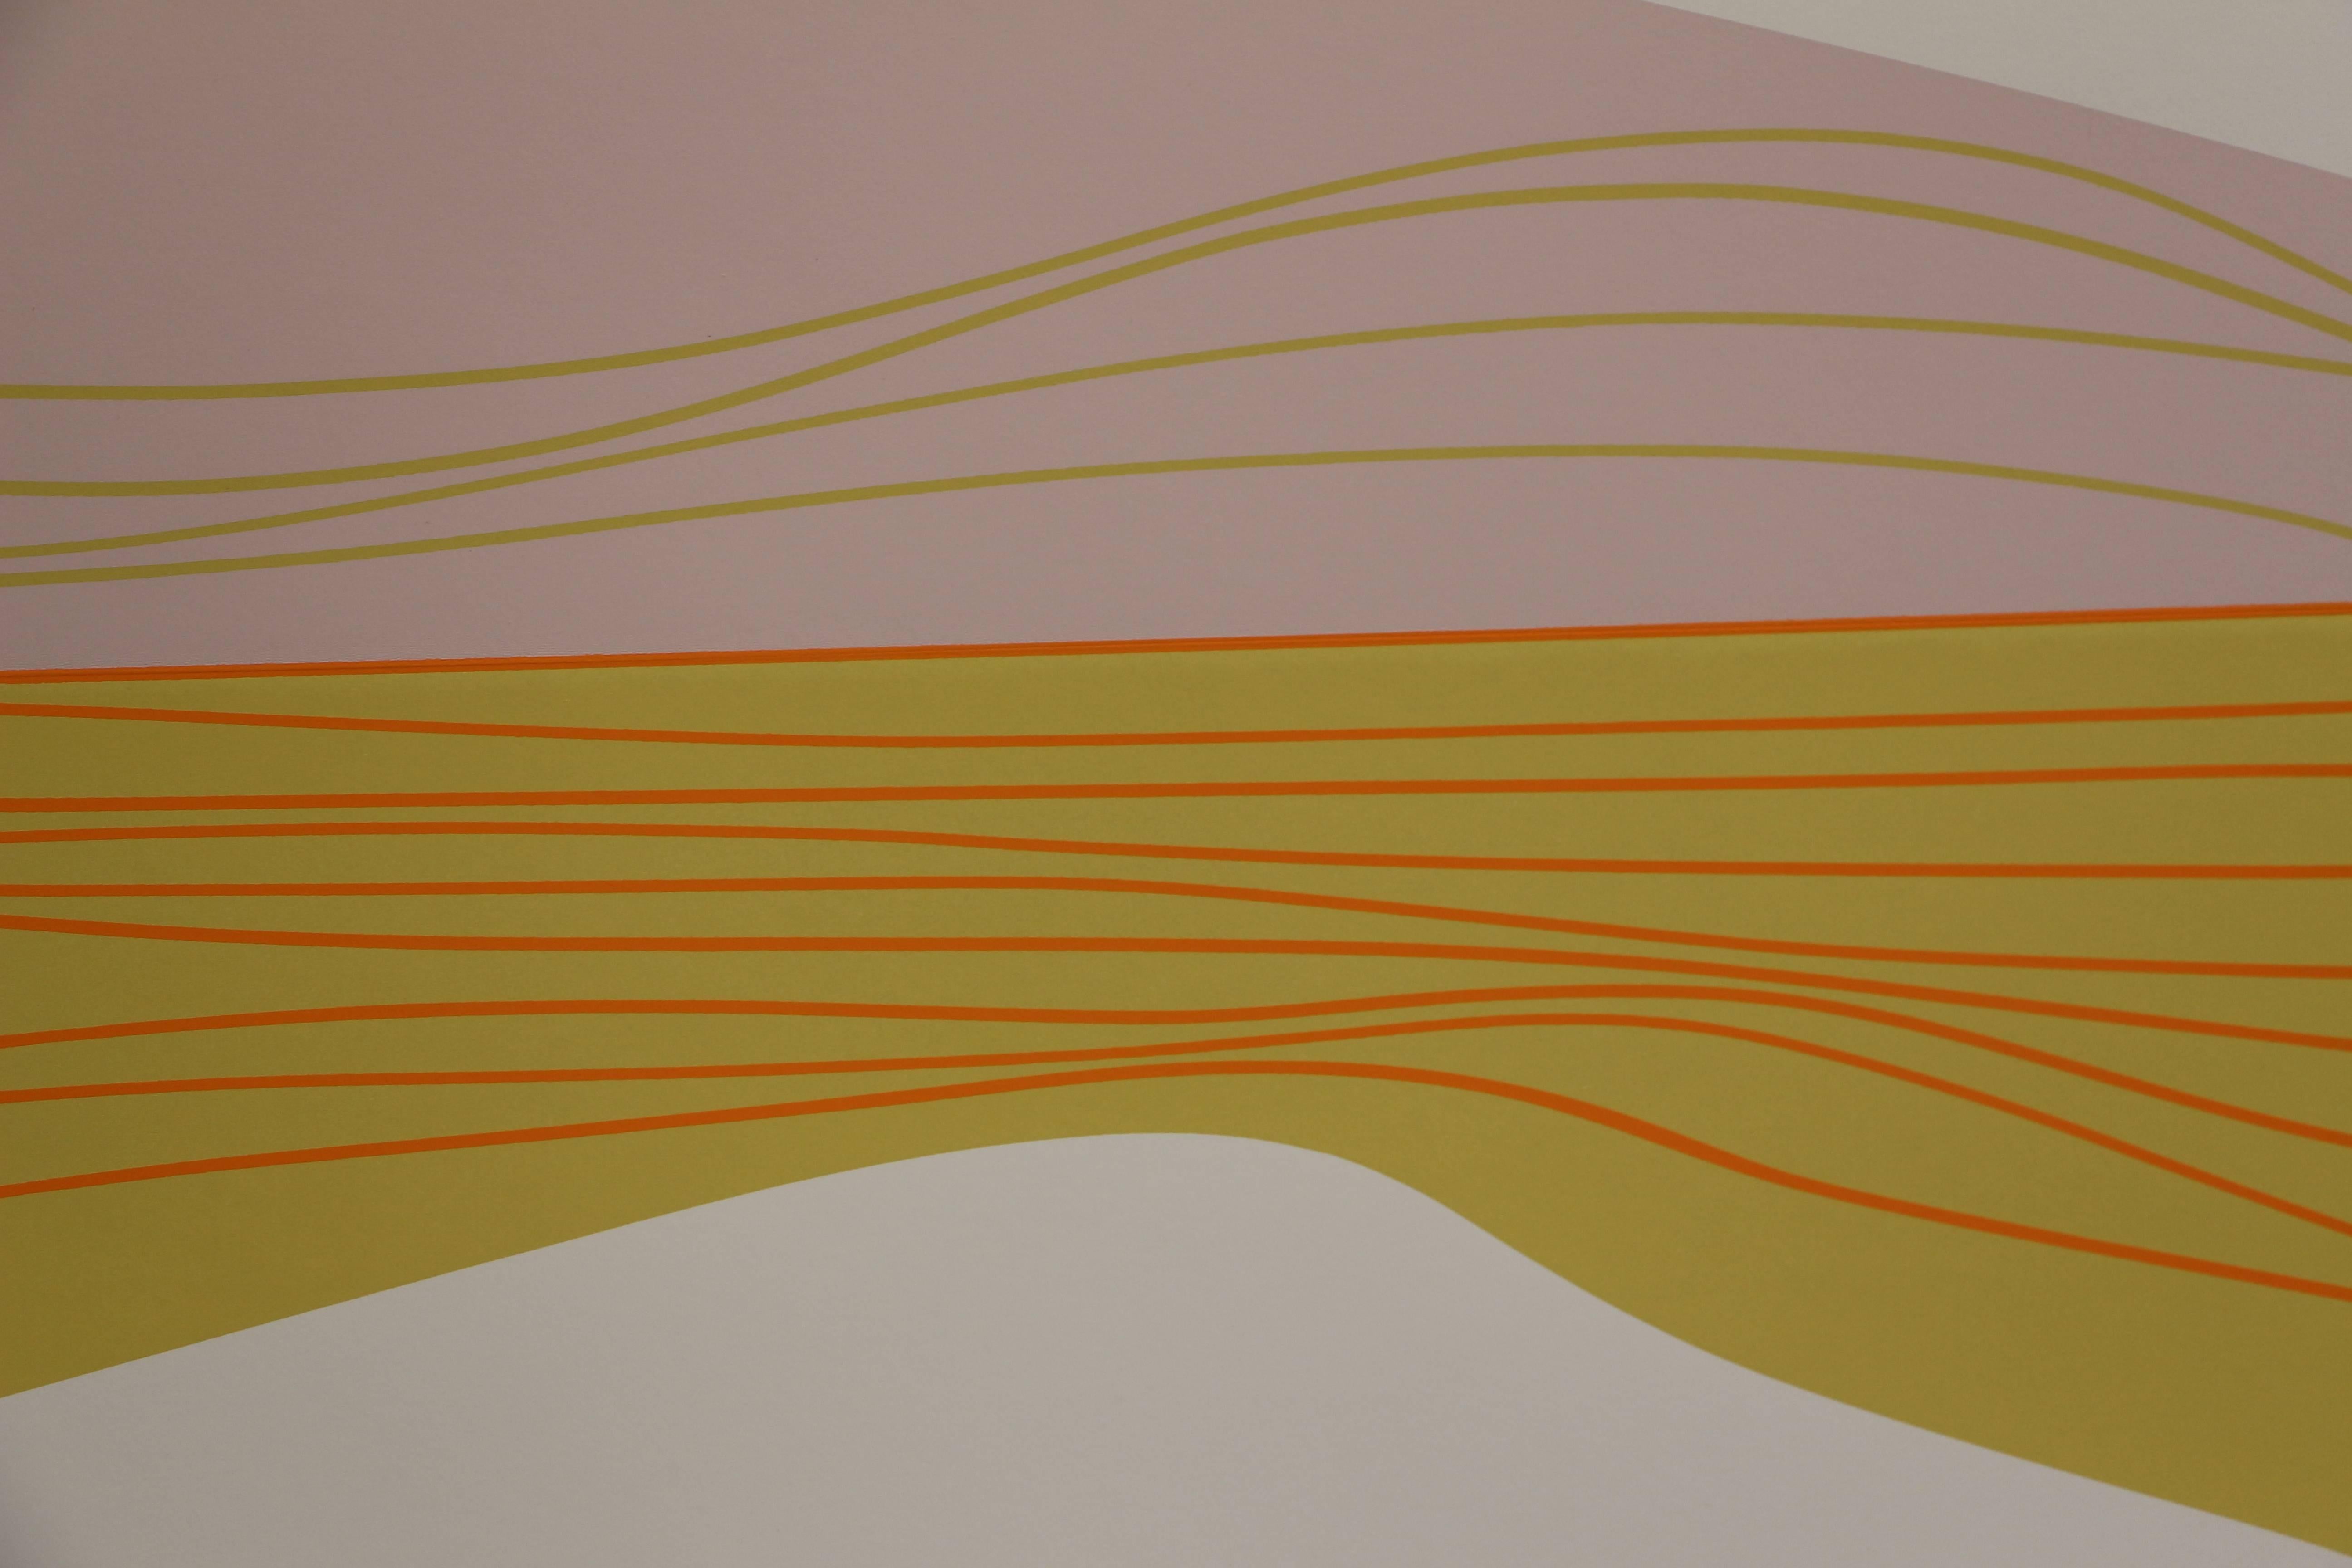 This serigraph is the first edition of a set of only 25 prints and it uses pink, yellow and orange colors in a swooping arc with smaller lines. As one of Lundeberg's later works, it flits between abstraction and figuration and has an emotional